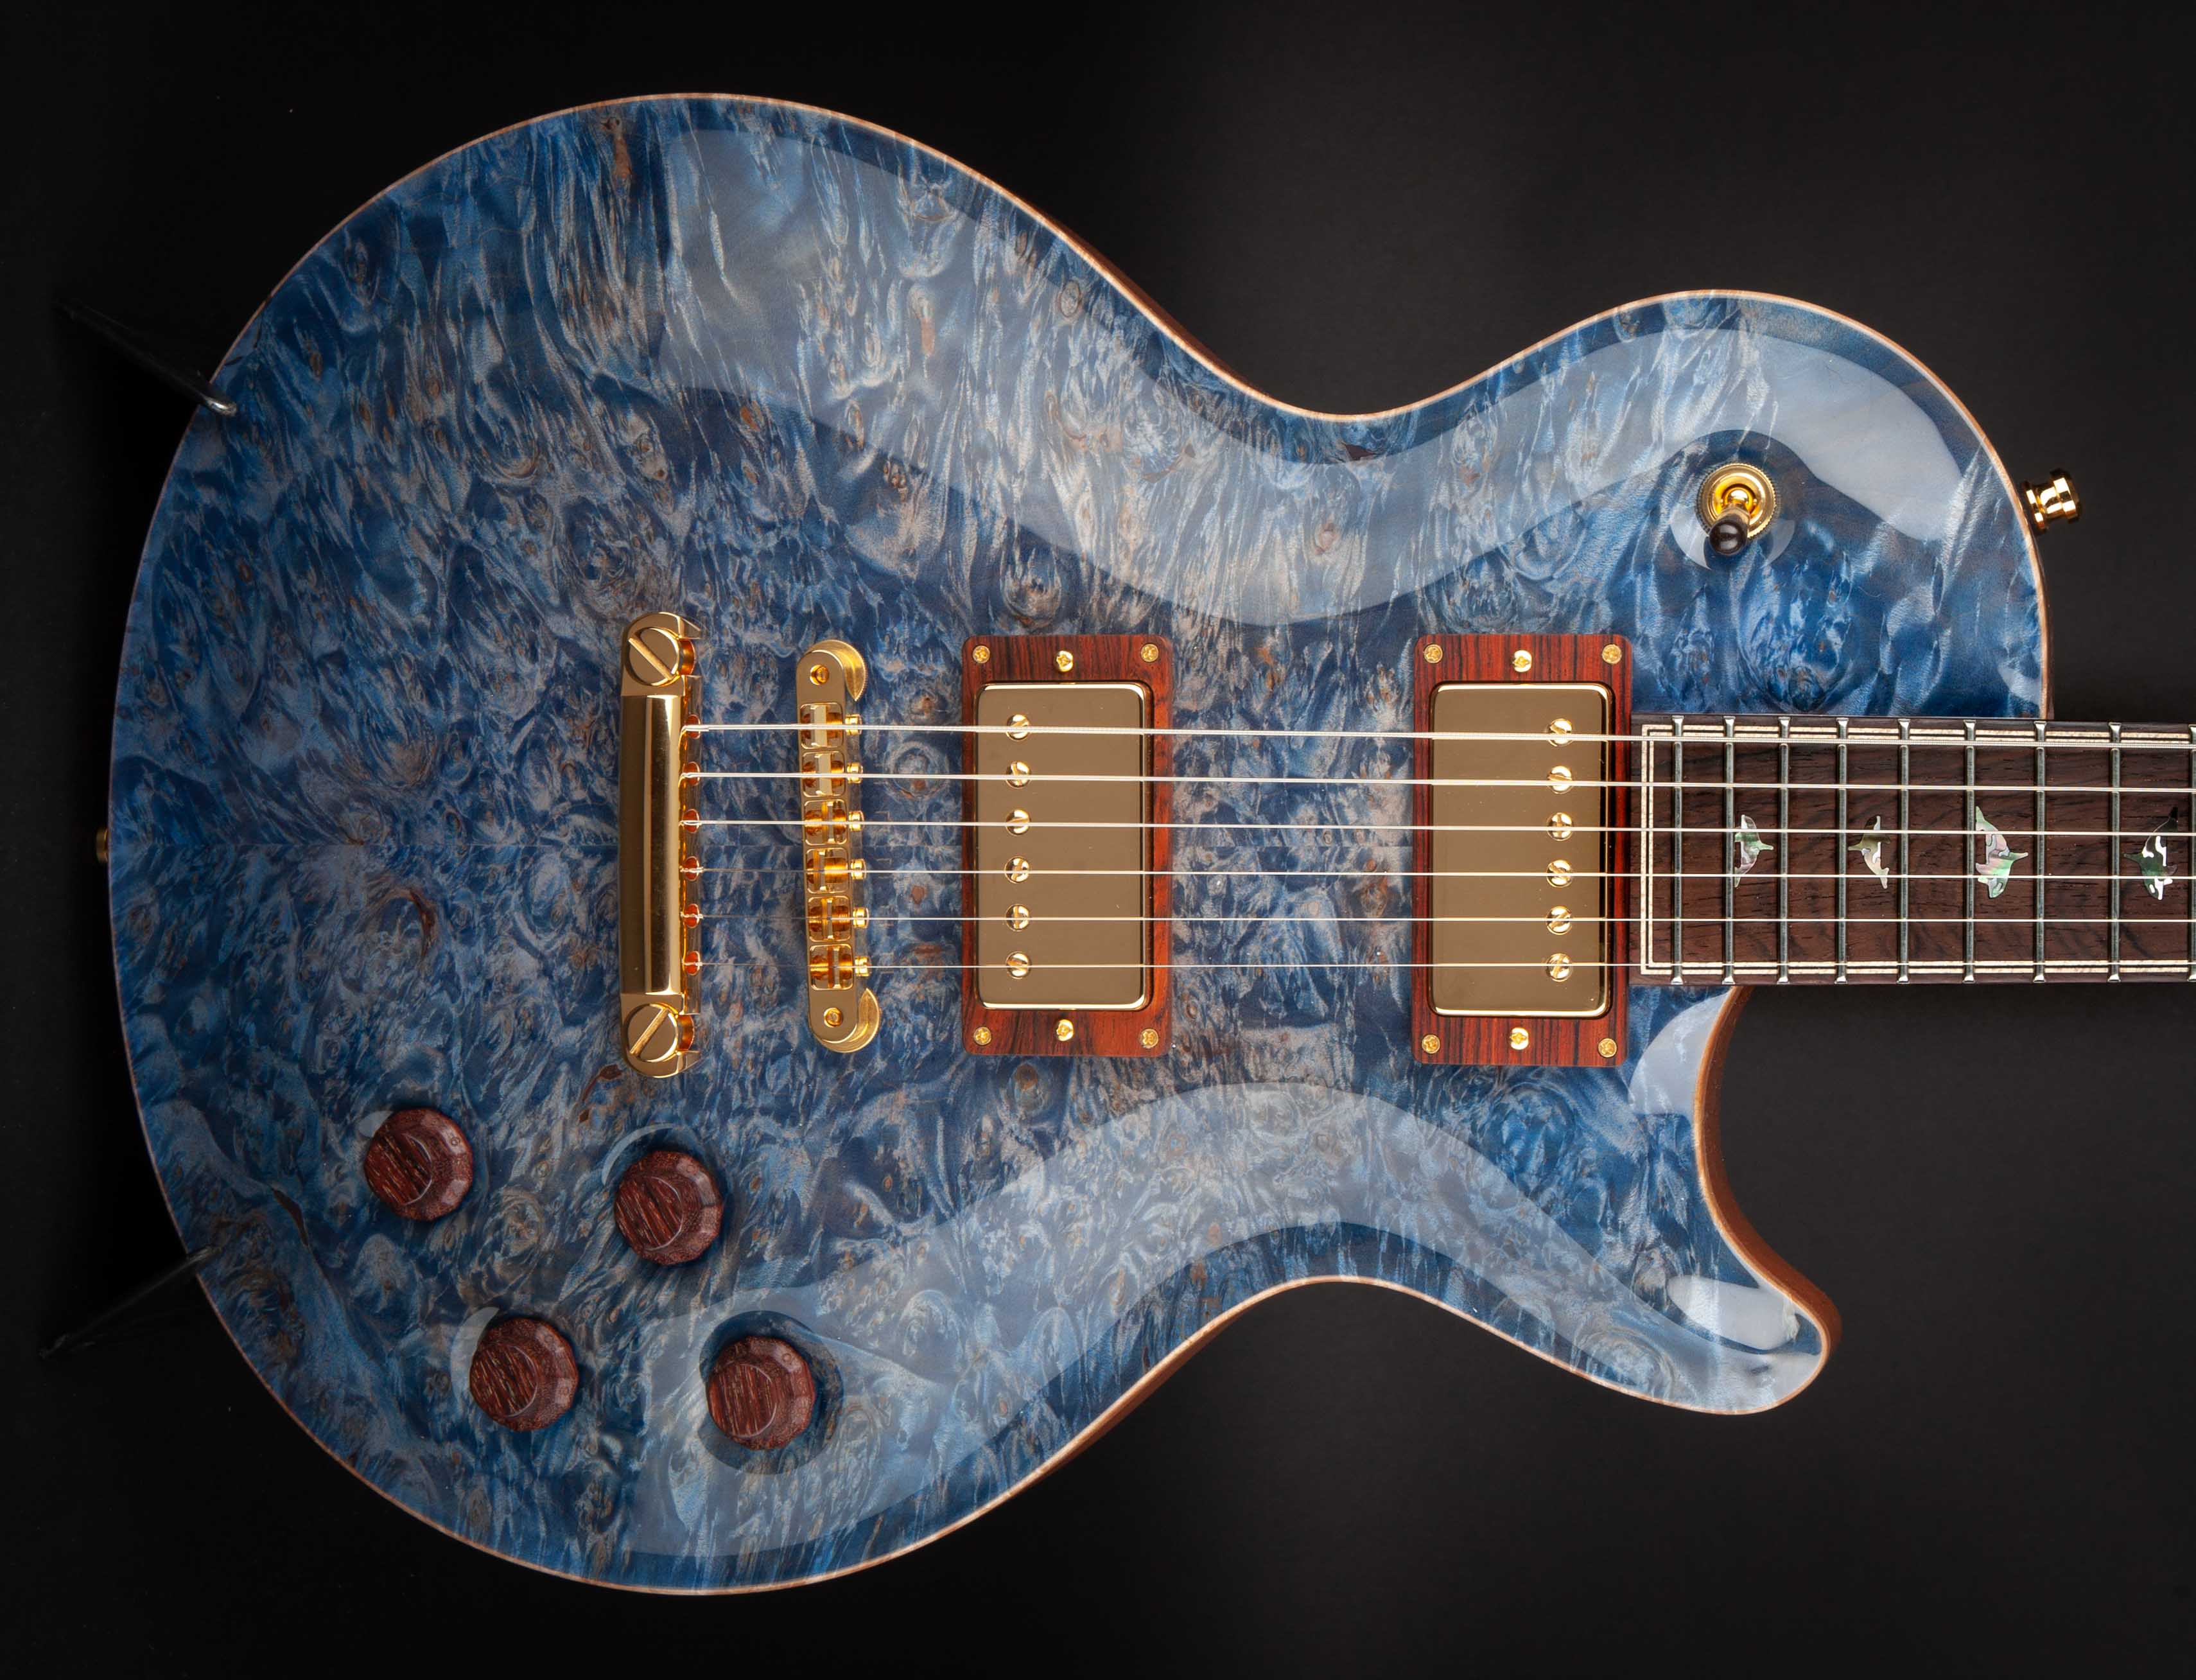 Nik Huber 20th Anniversary Orca 6/10 Starry Night Burst with Brazilian Fingerboard and Parts #72626